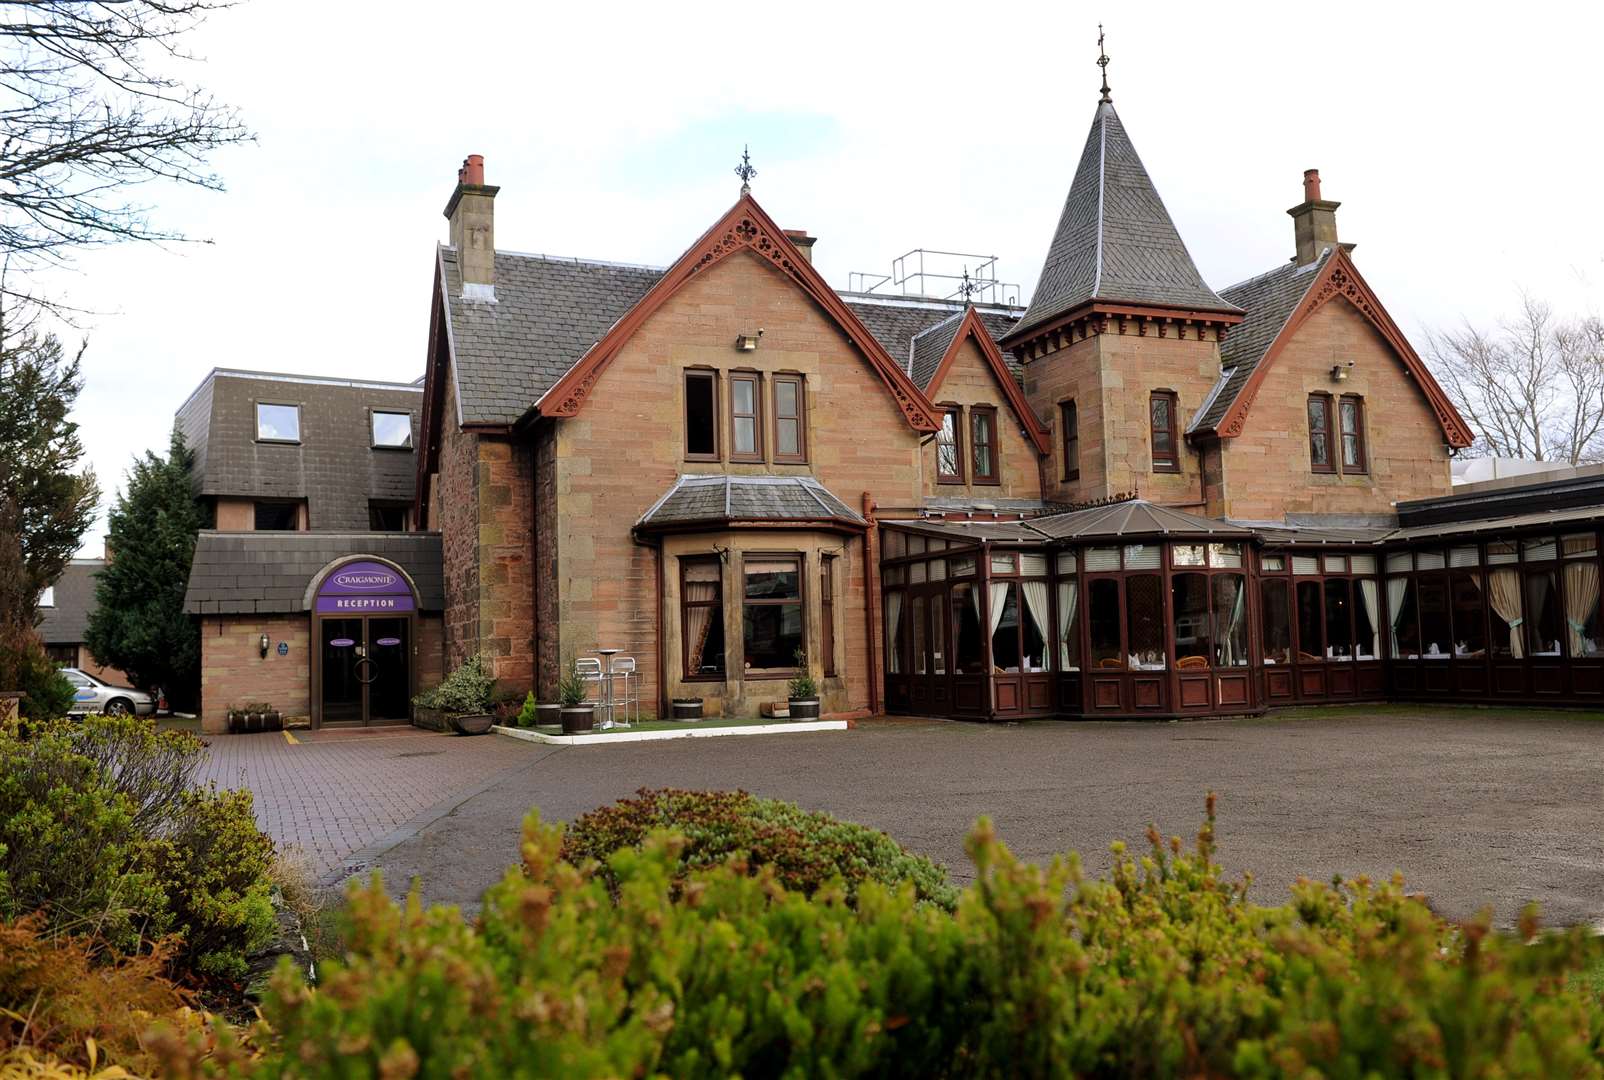 The Craigmonie Hotel in Inverness was once a maternity home providing free care to mothers-to-be.